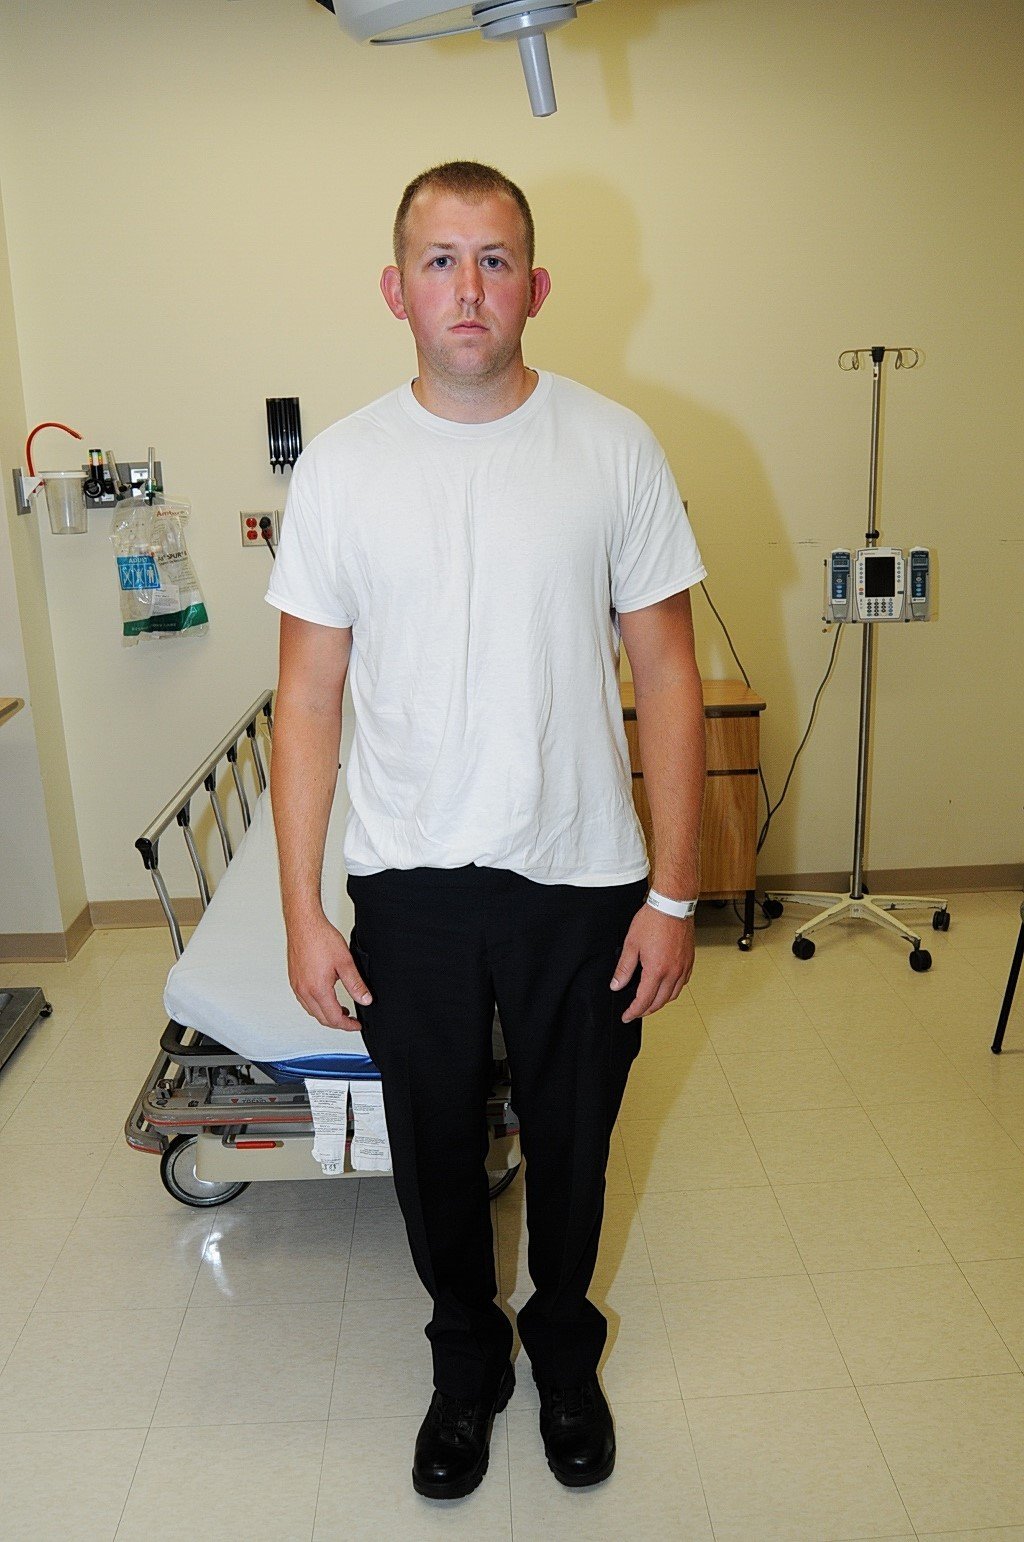 A photograph of Ferguson, Missouri police officer Darren Wilson as submitted as evidence to the St. Louis County Grand Jury.